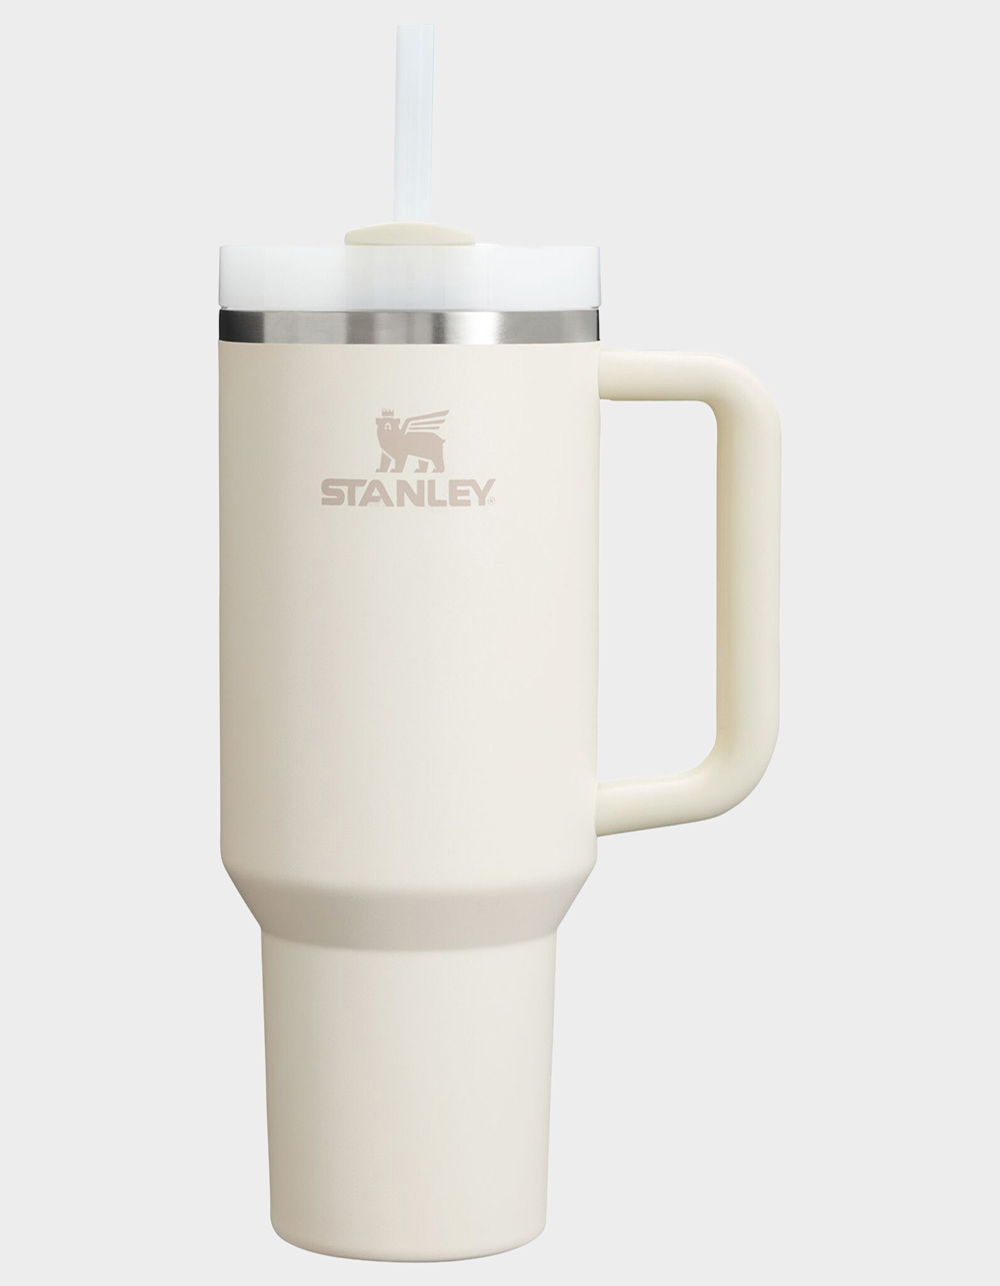 Stanley The Quencher H2.0 FlowState™ Tumbler Limited Edition Color | 40 OZ  - Lavender